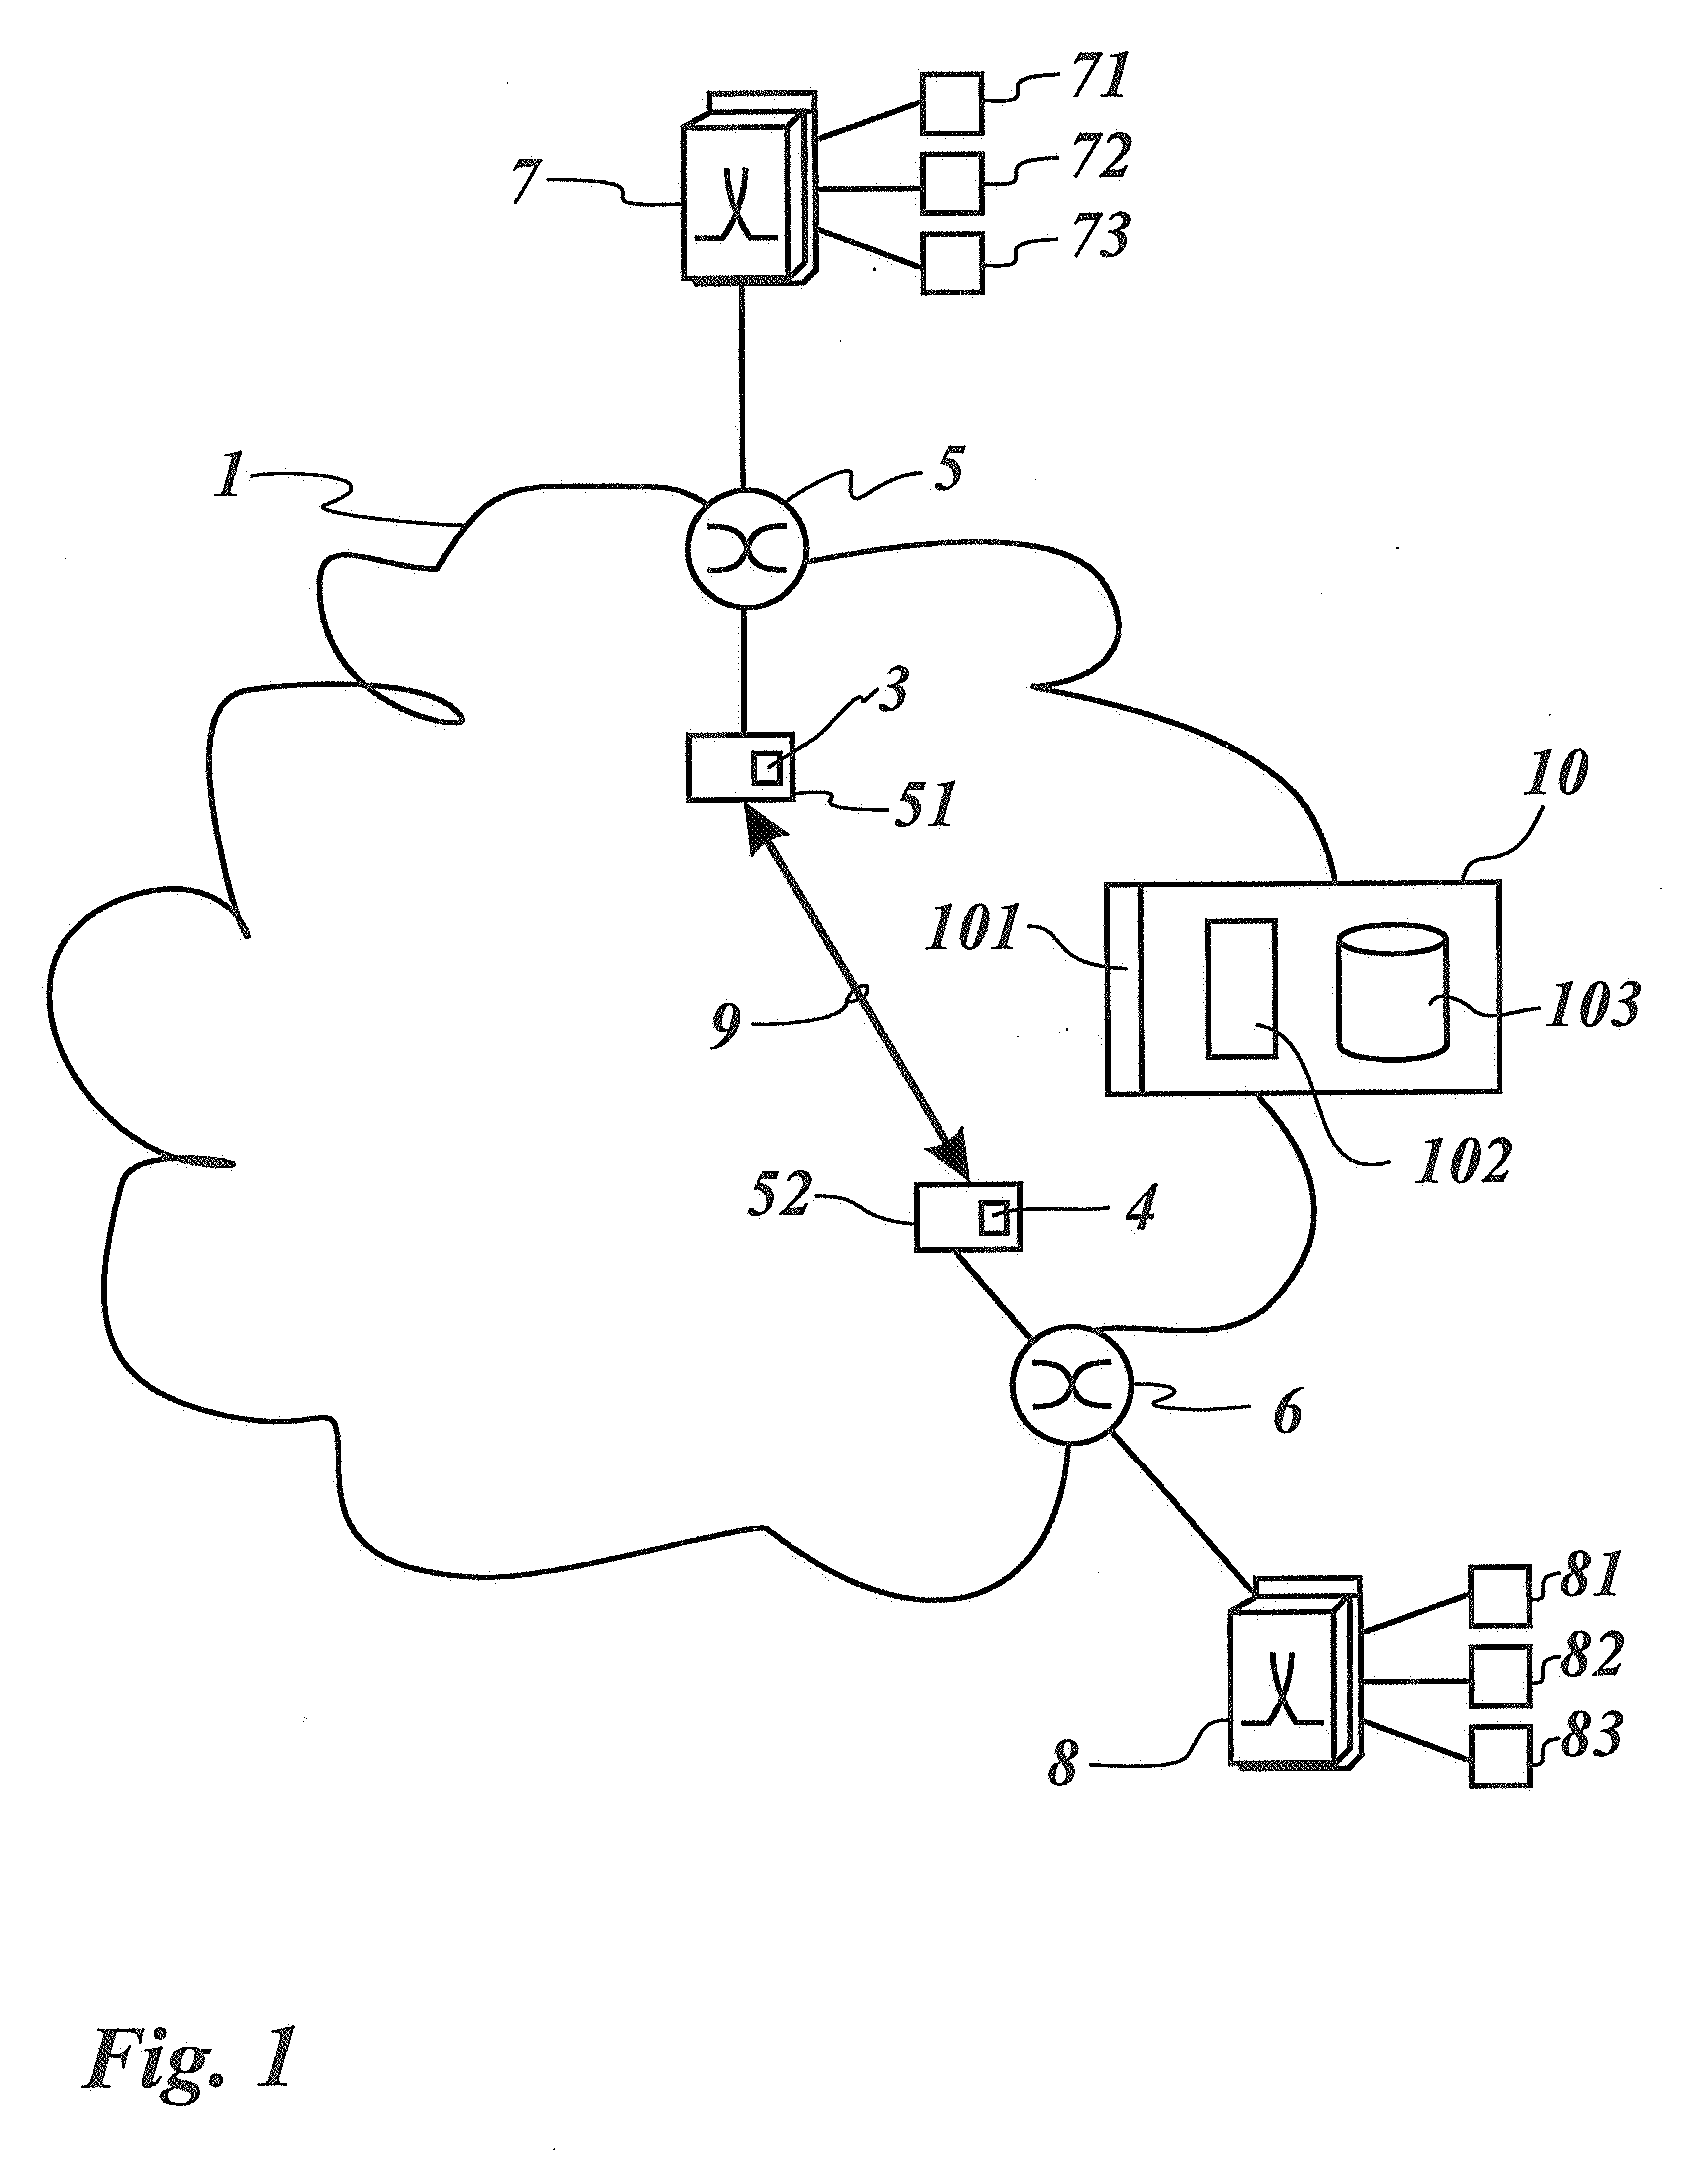 Method of monitoring the quality of a realtime communication